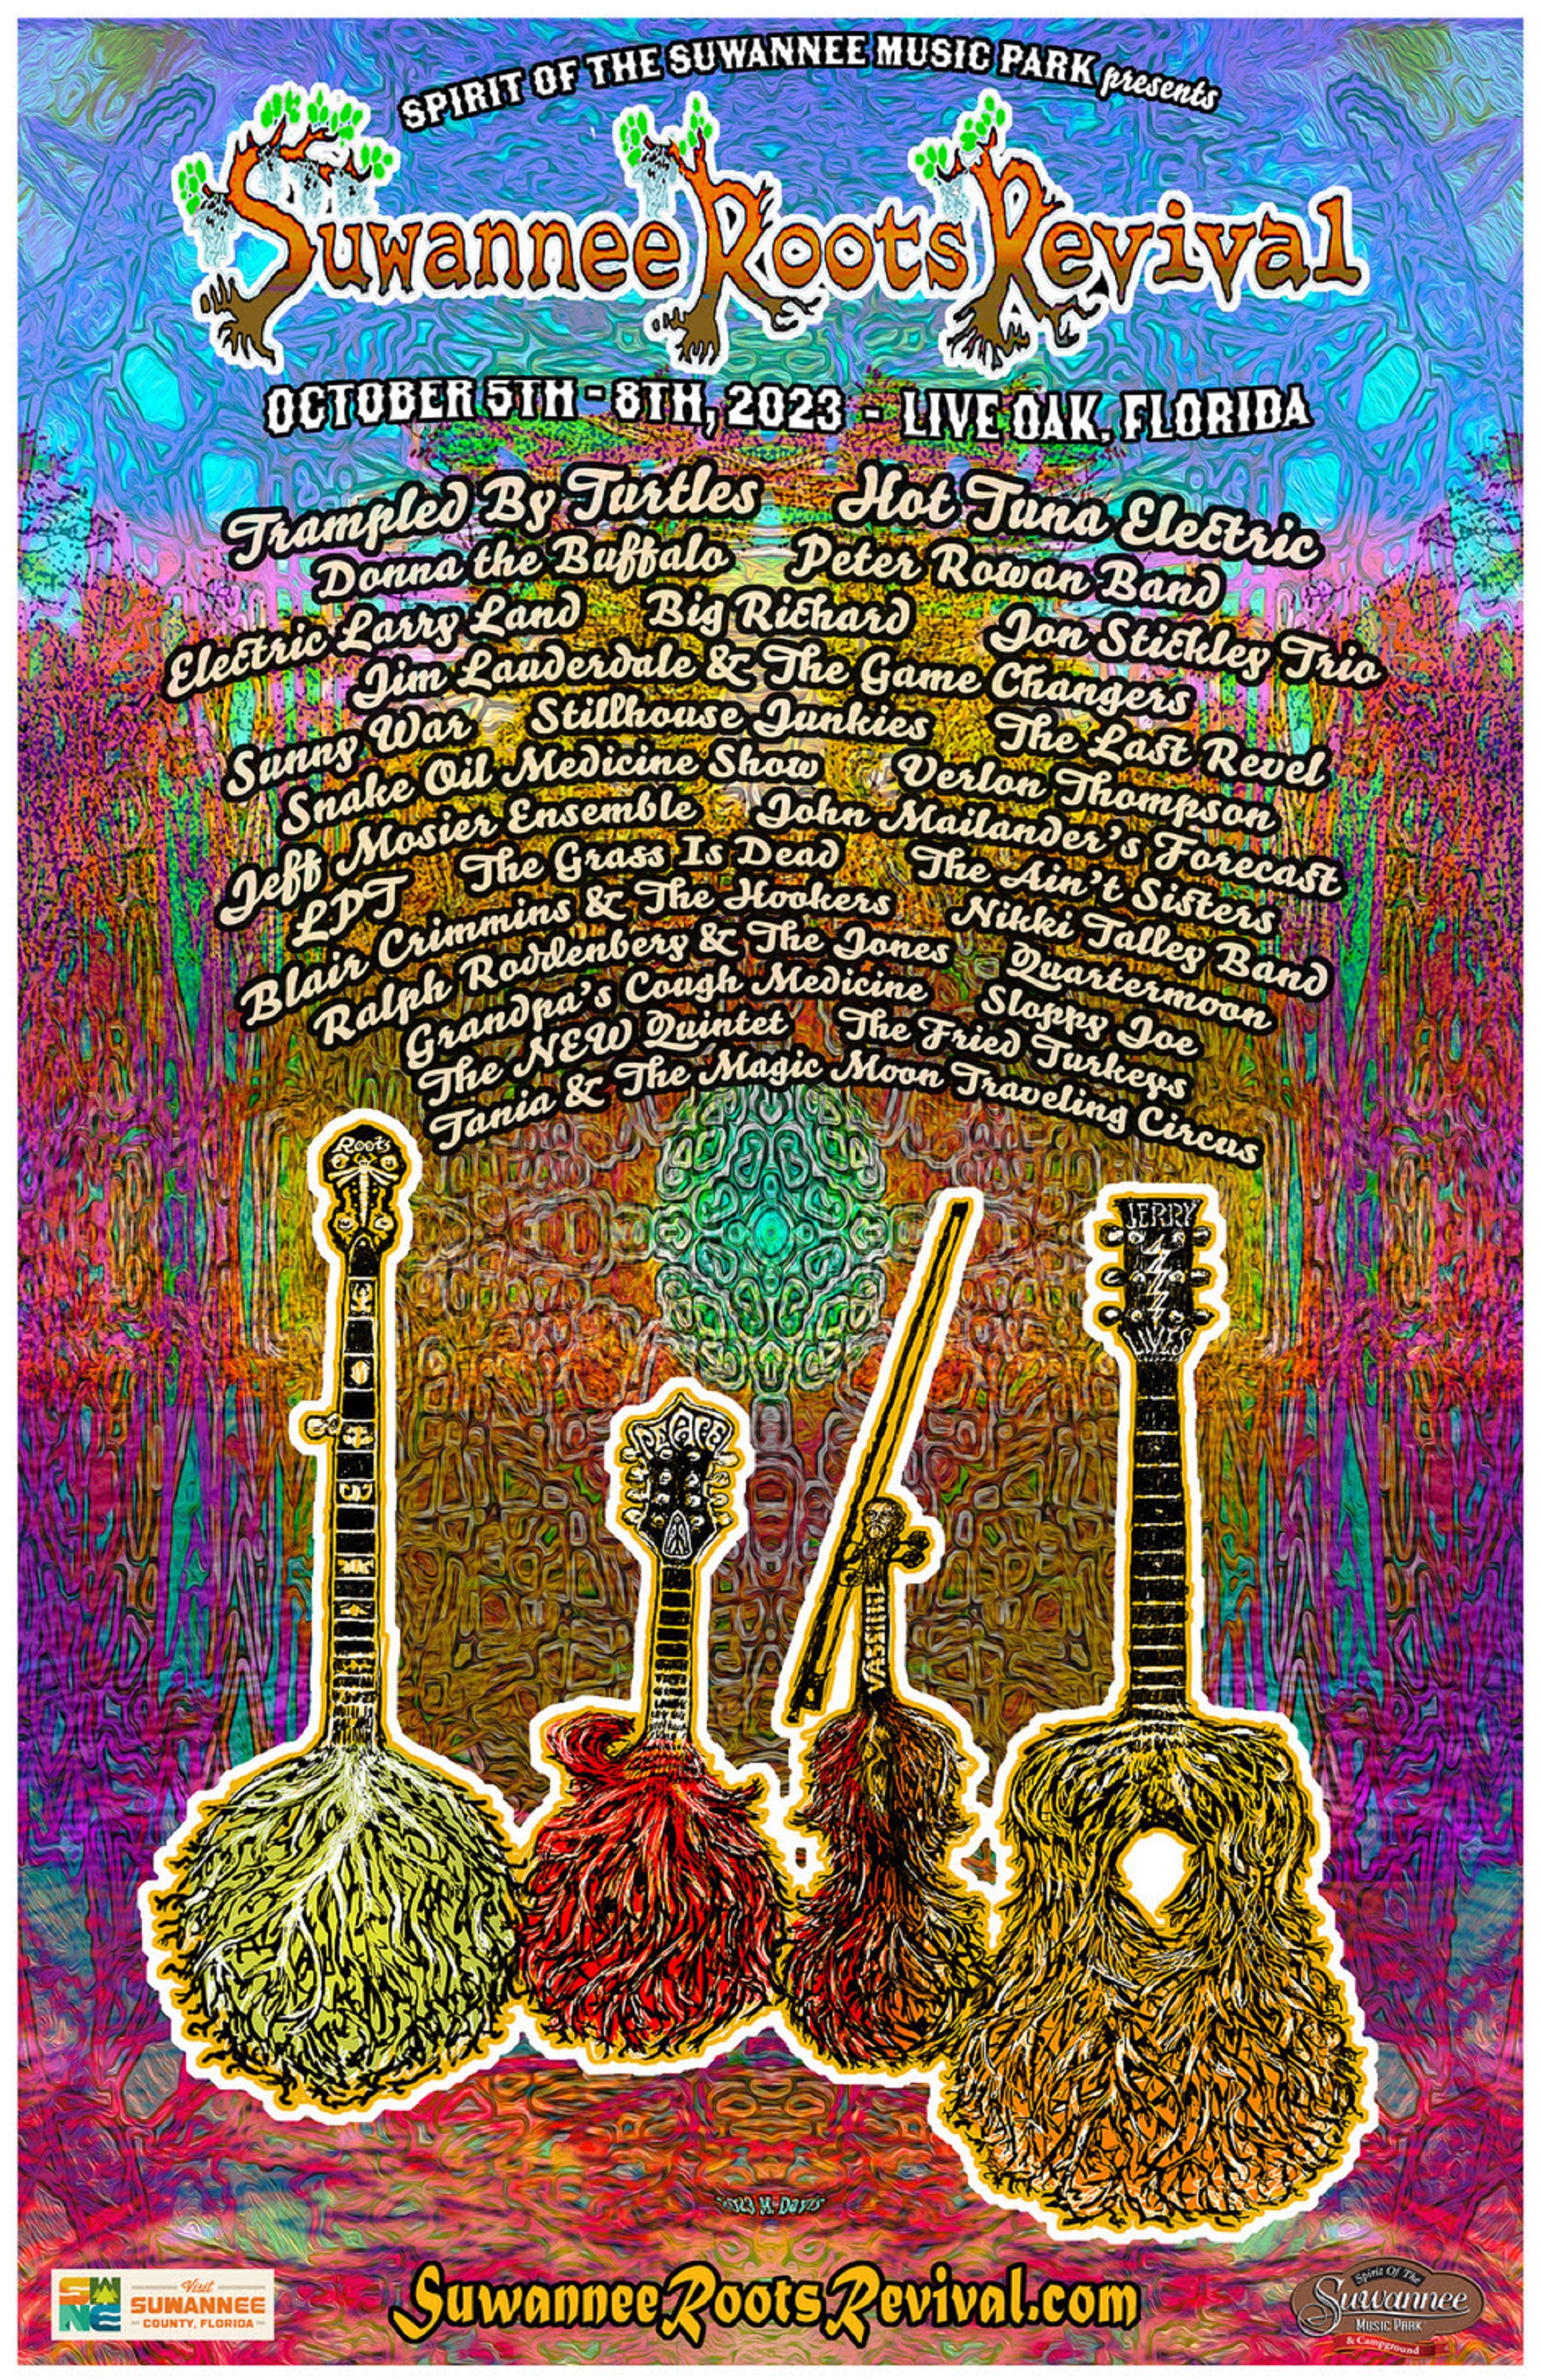 Suwannee Roots Revival 2023 Schedule Announced